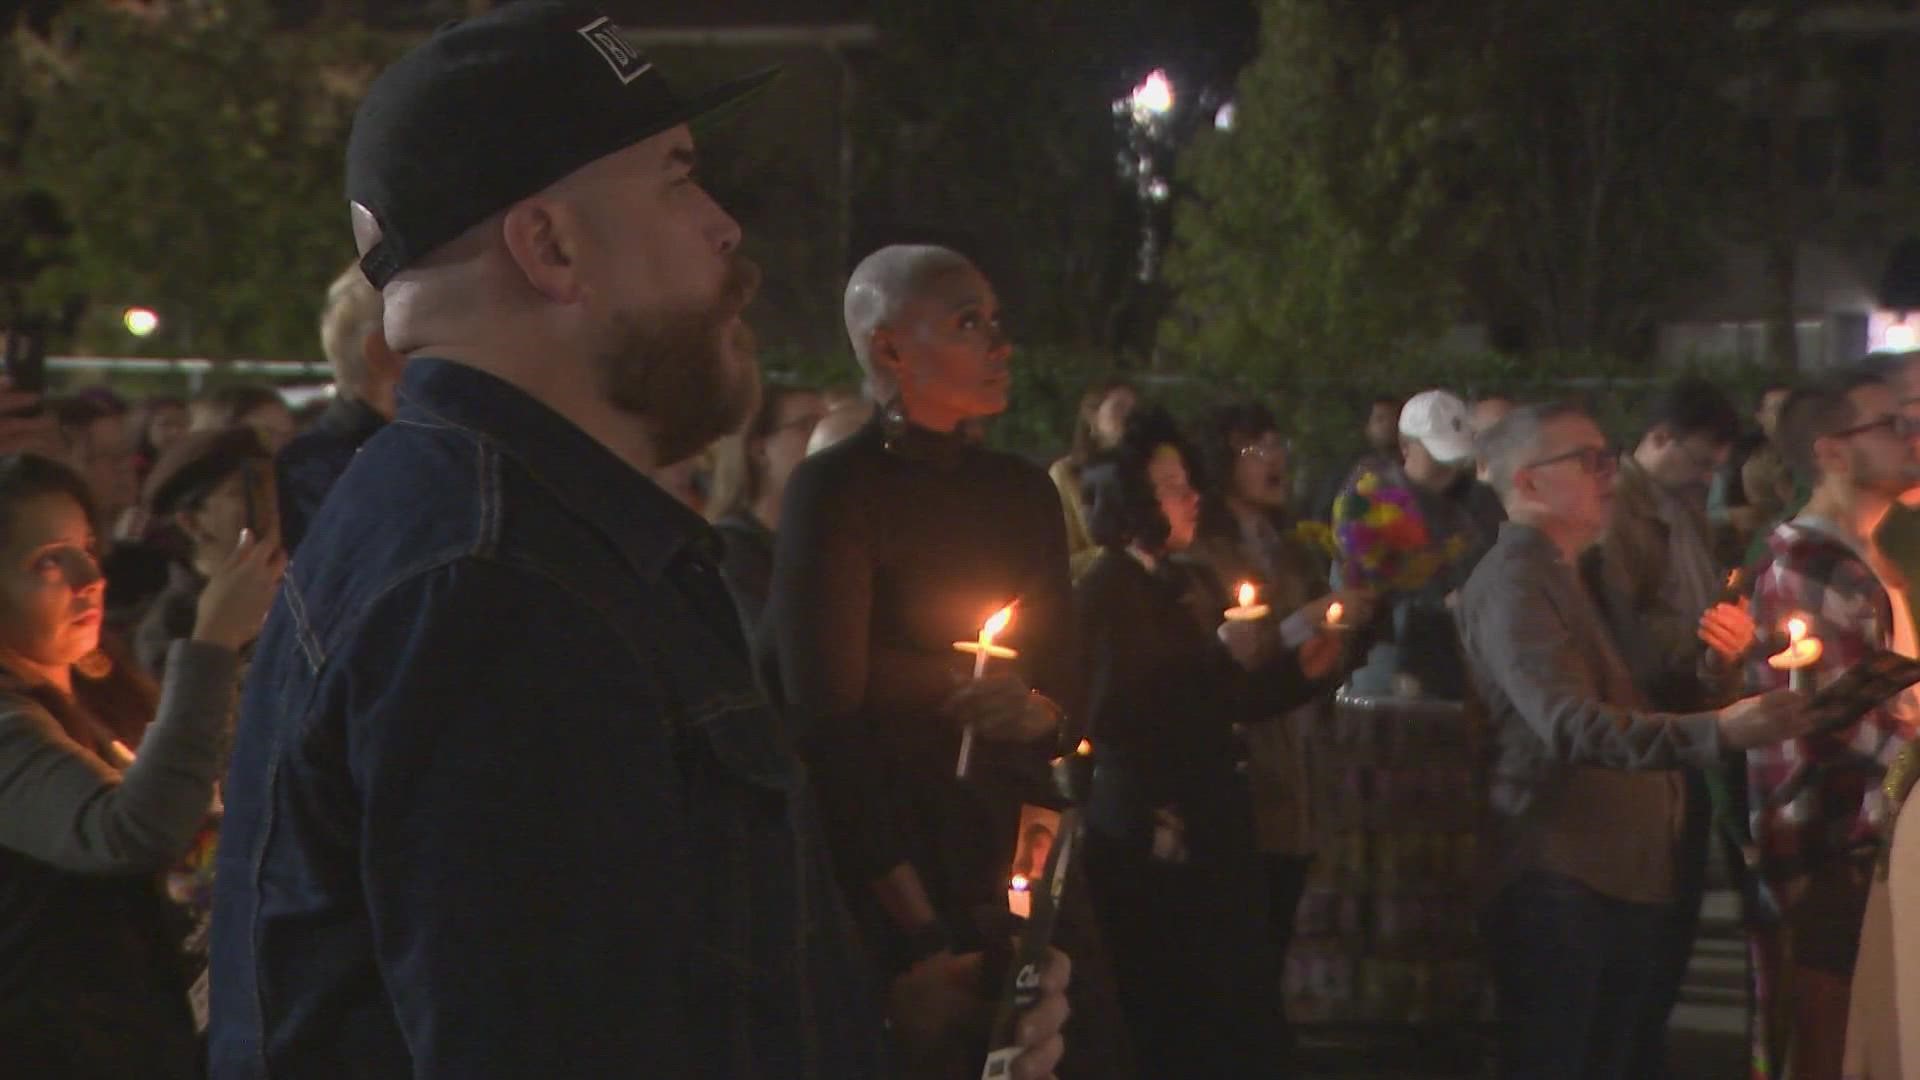 More than 100 people gathered vowing to stand up to the hate-filled rhetoric that lead to the mass murder at an LGBTQ nightclub in Colorado.